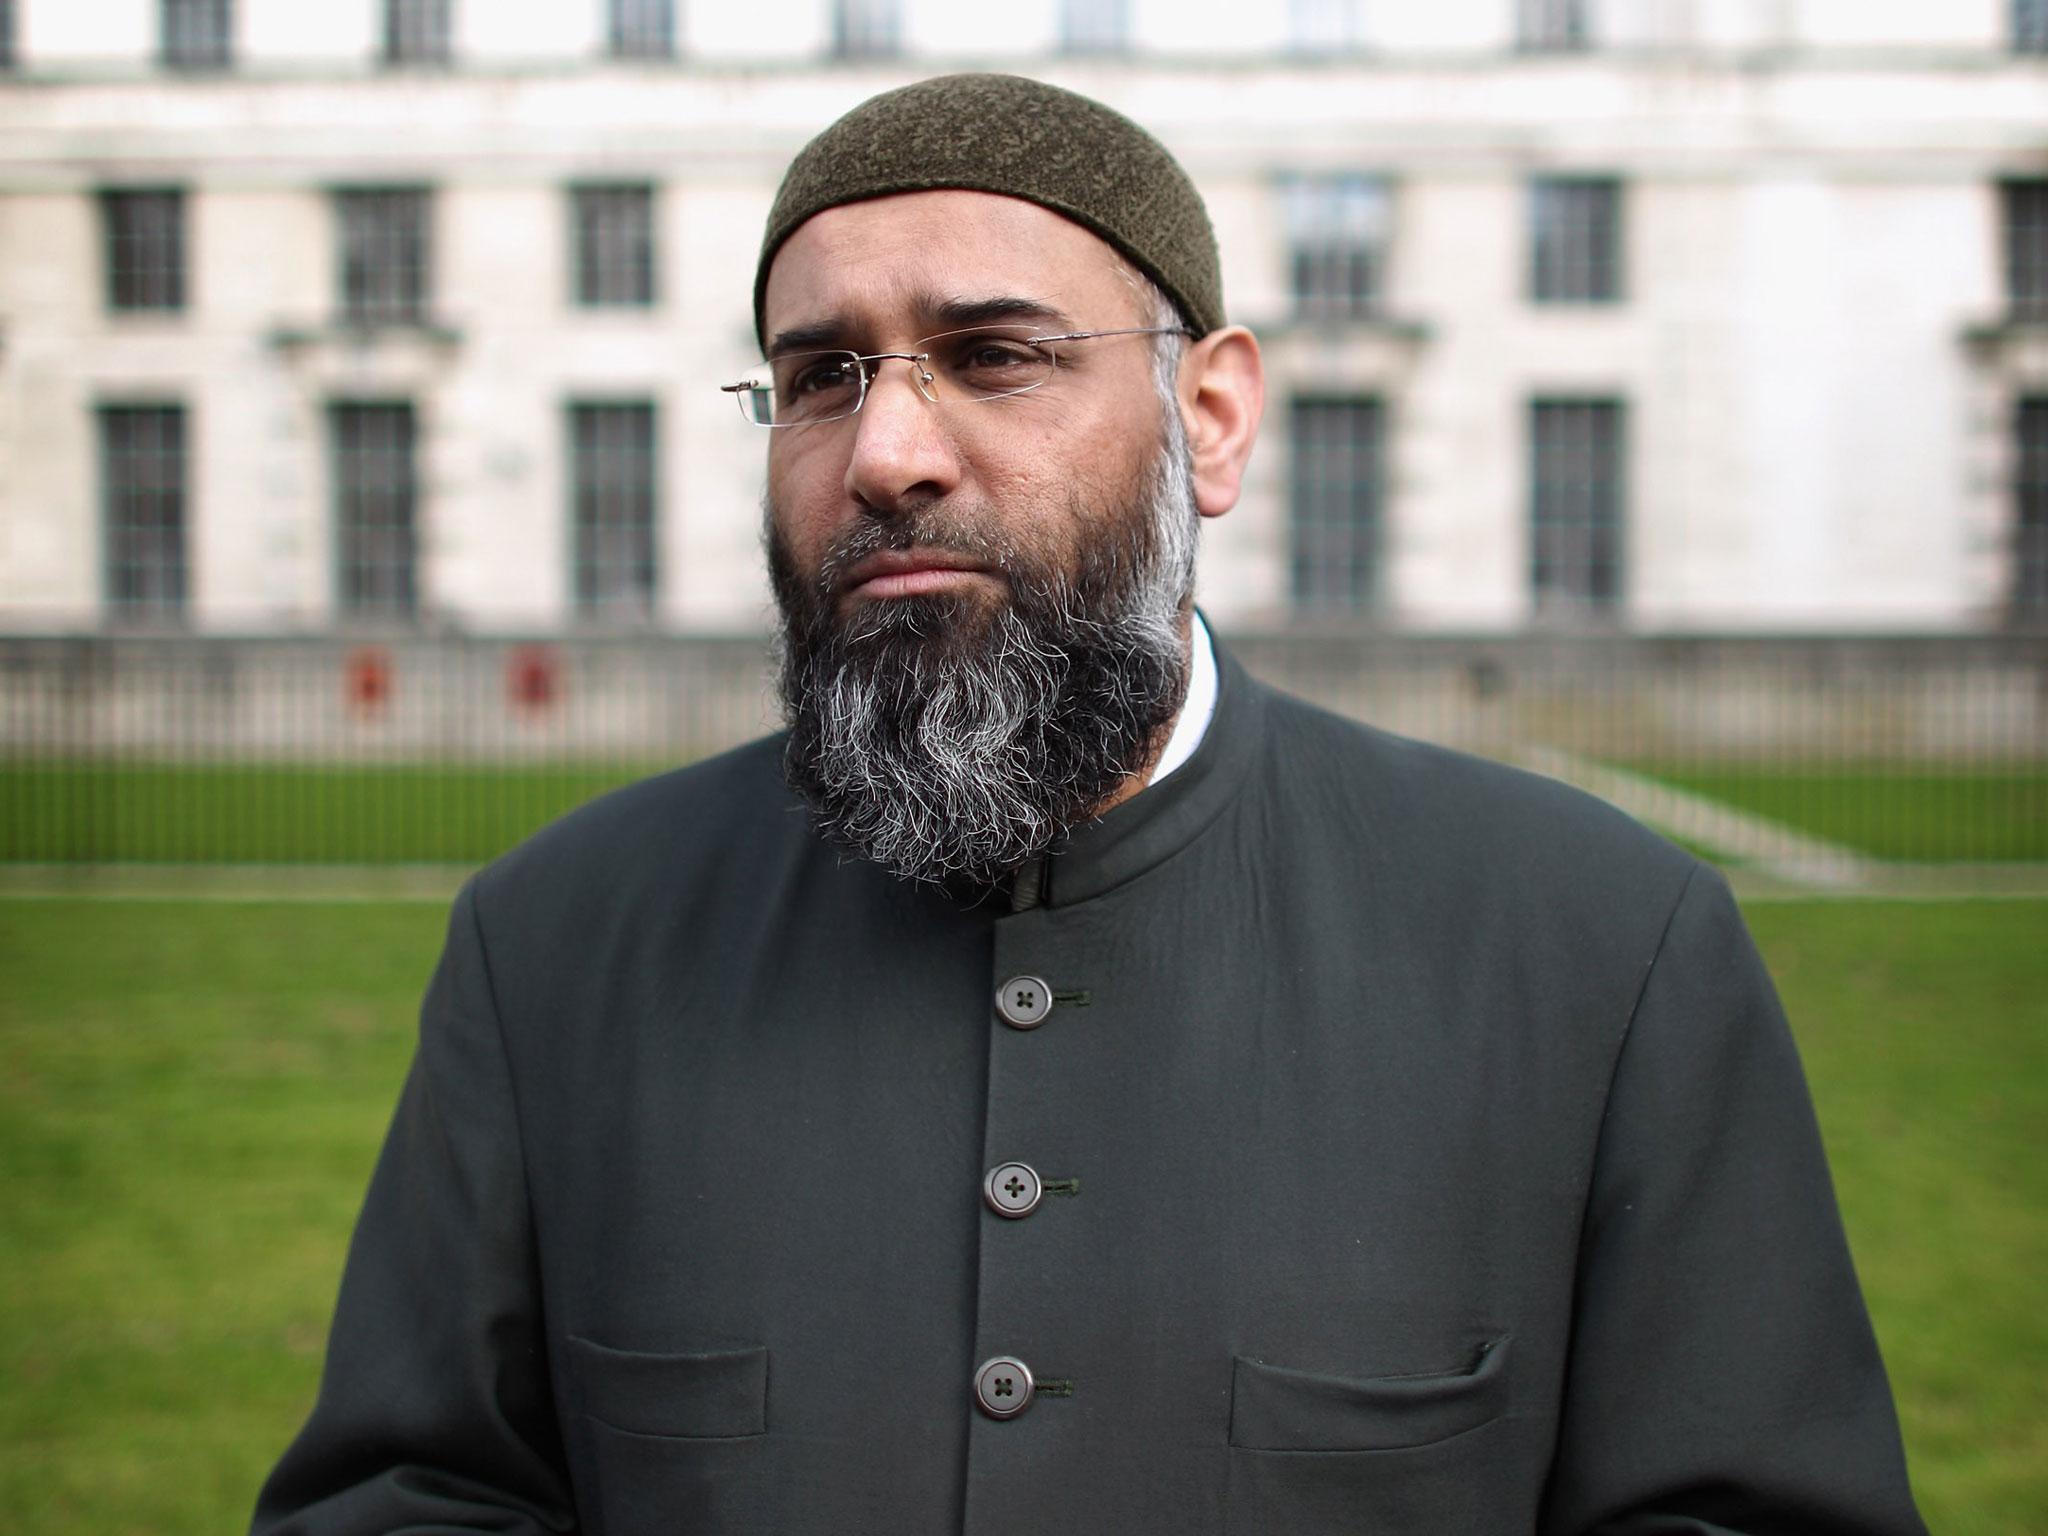 Anjem Choudary refused to condemn Lee Rigby's murder